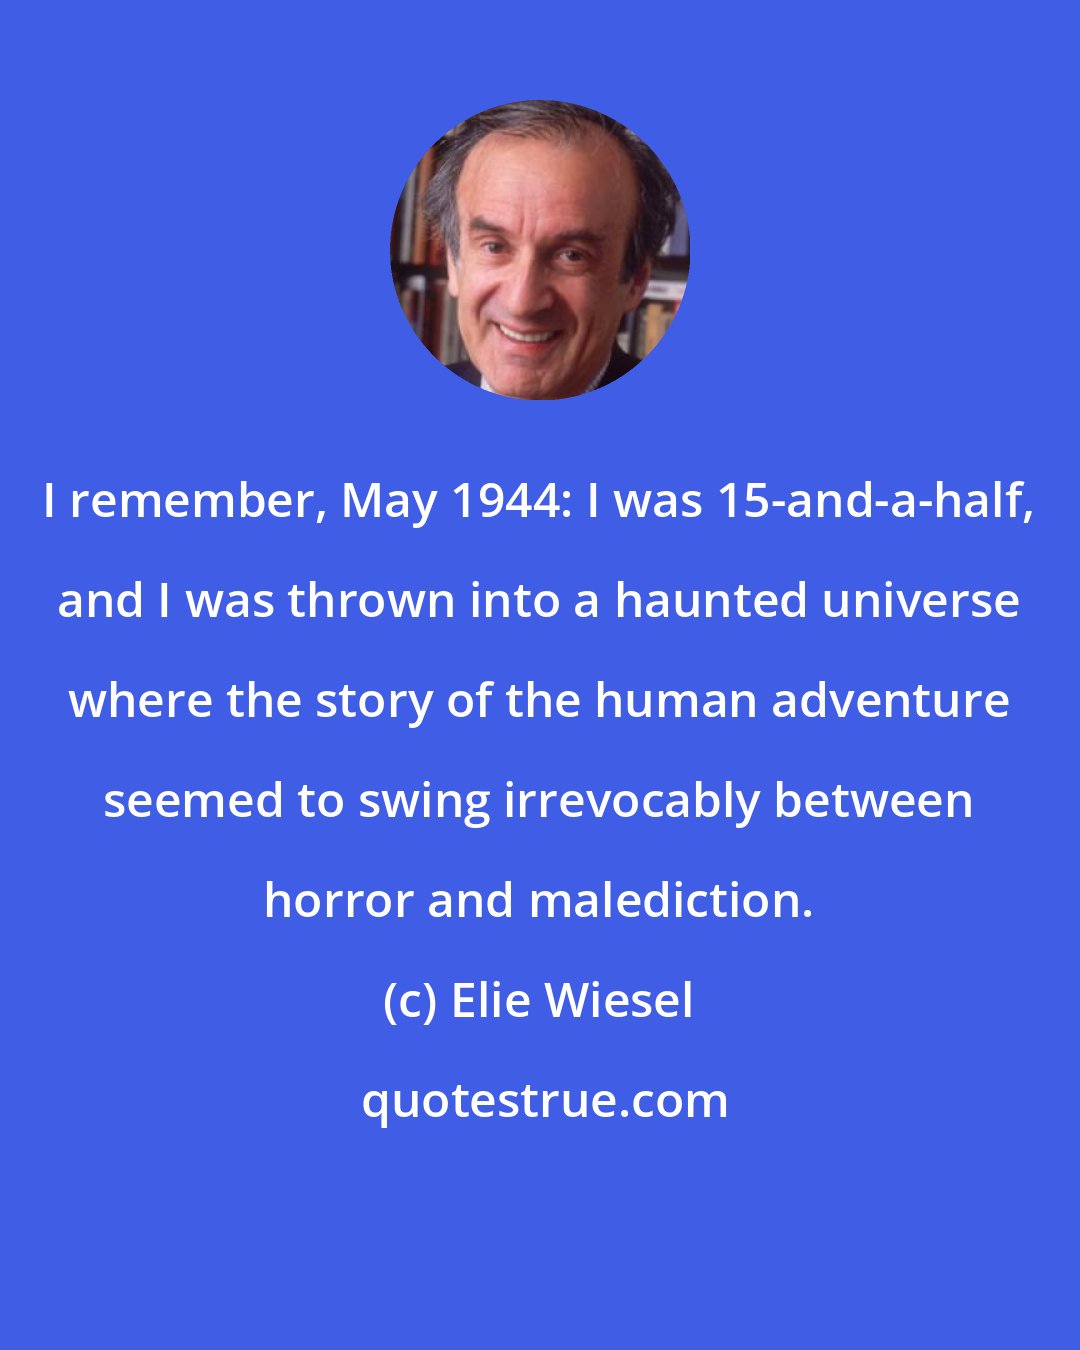 Elie Wiesel: I remember, May 1944: I was 15-and-a-half, and I was thrown into a haunted universe where the story of the human adventure seemed to swing irrevocably between horror and malediction.